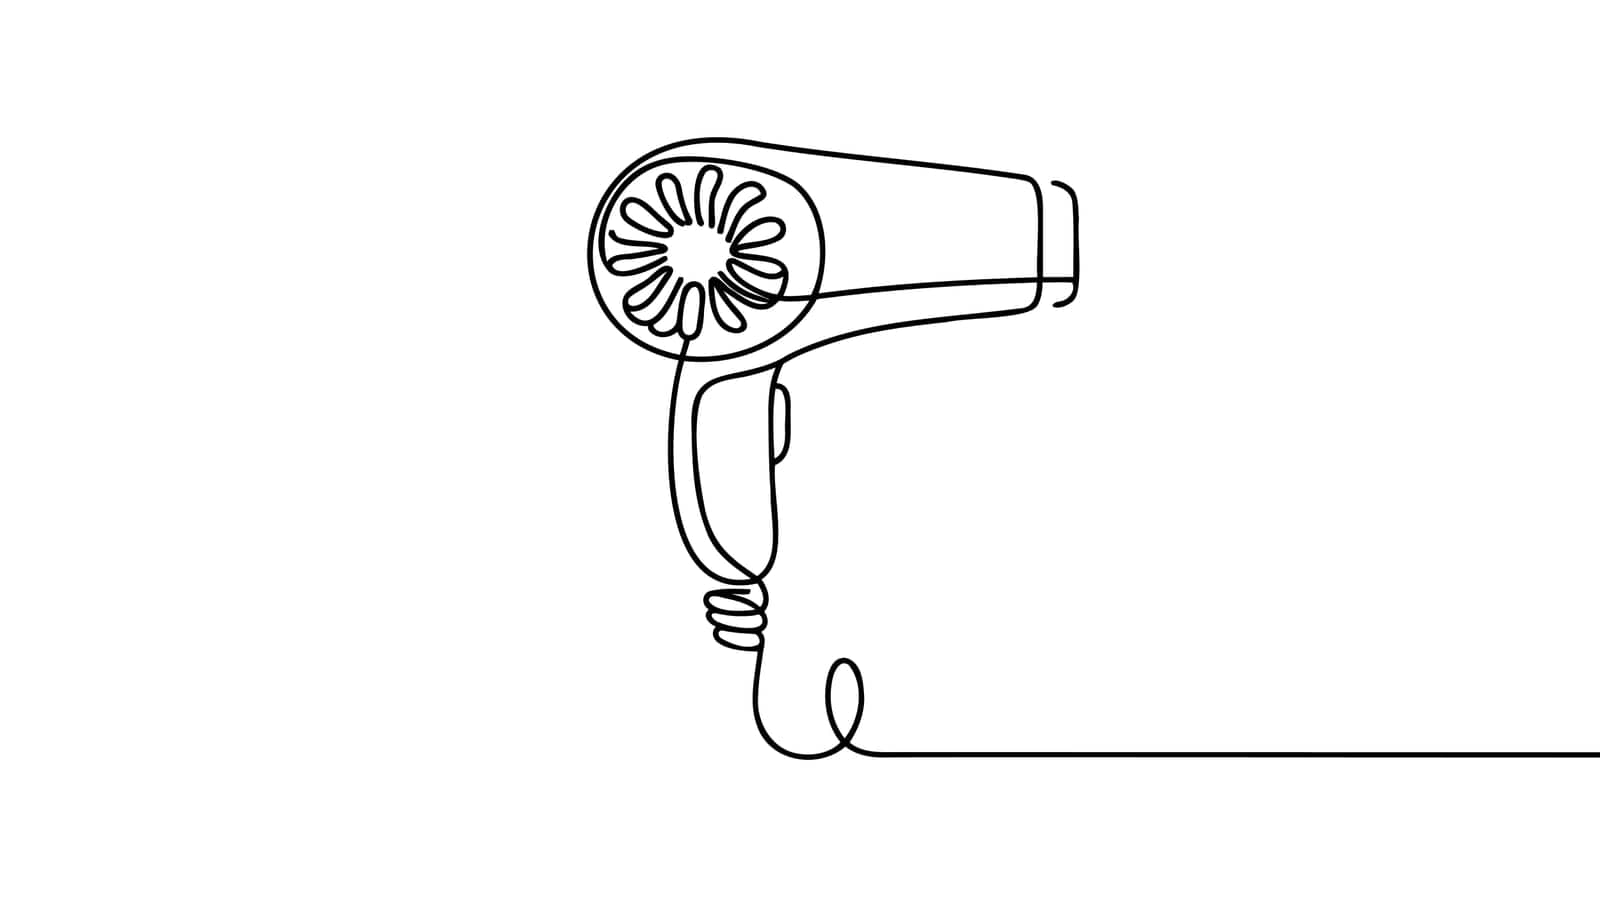 One continuous line drawing of hair dryer electric home appliance. by Artisttop